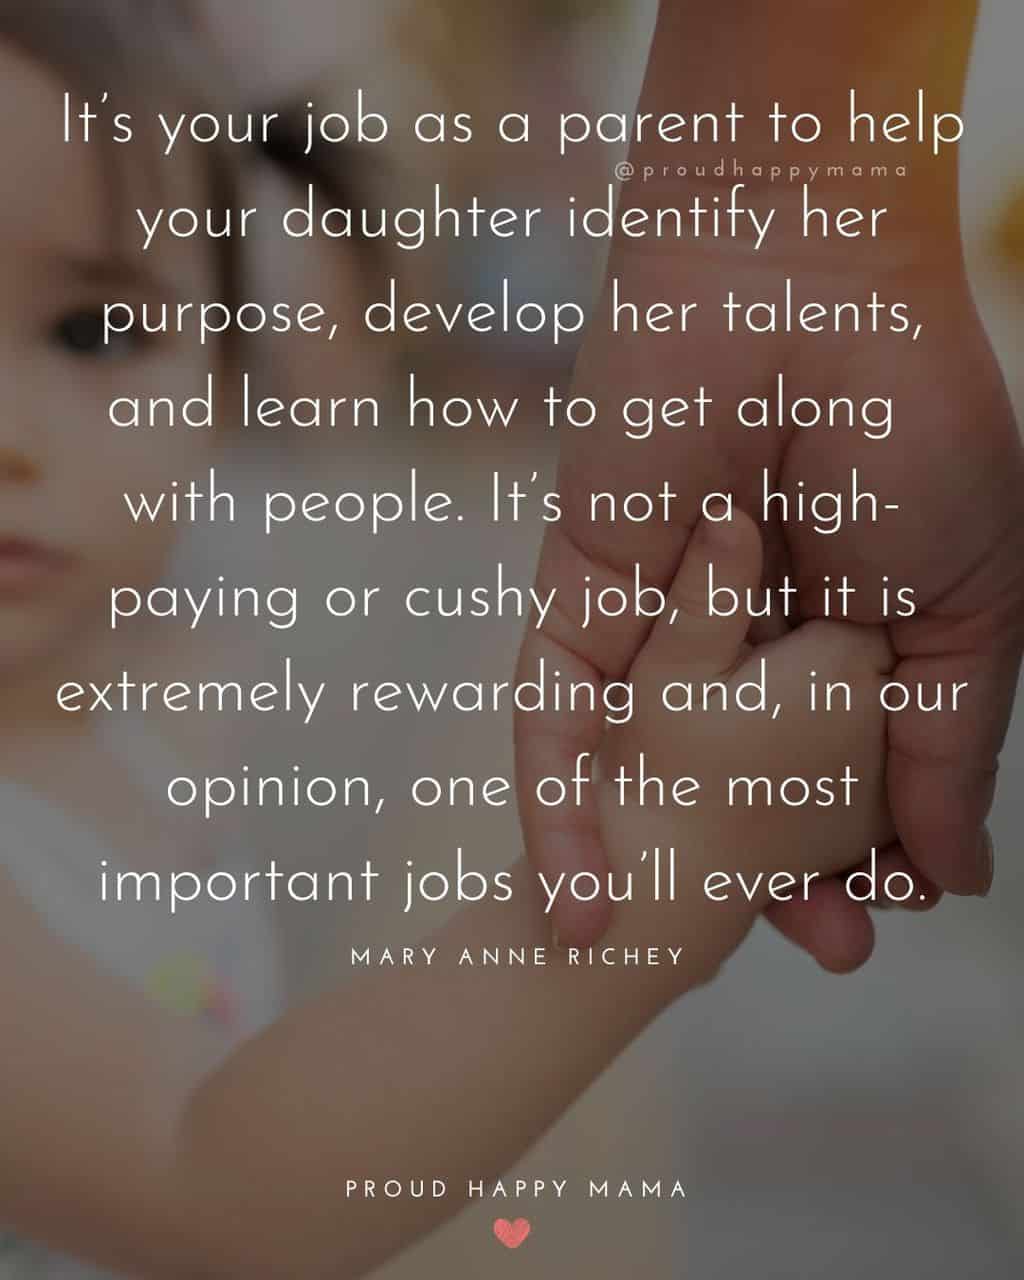 my daughters quotes - ‘It’s your job as a parent to help your daughter identify her purpose, develop her talents, and learn how to get along